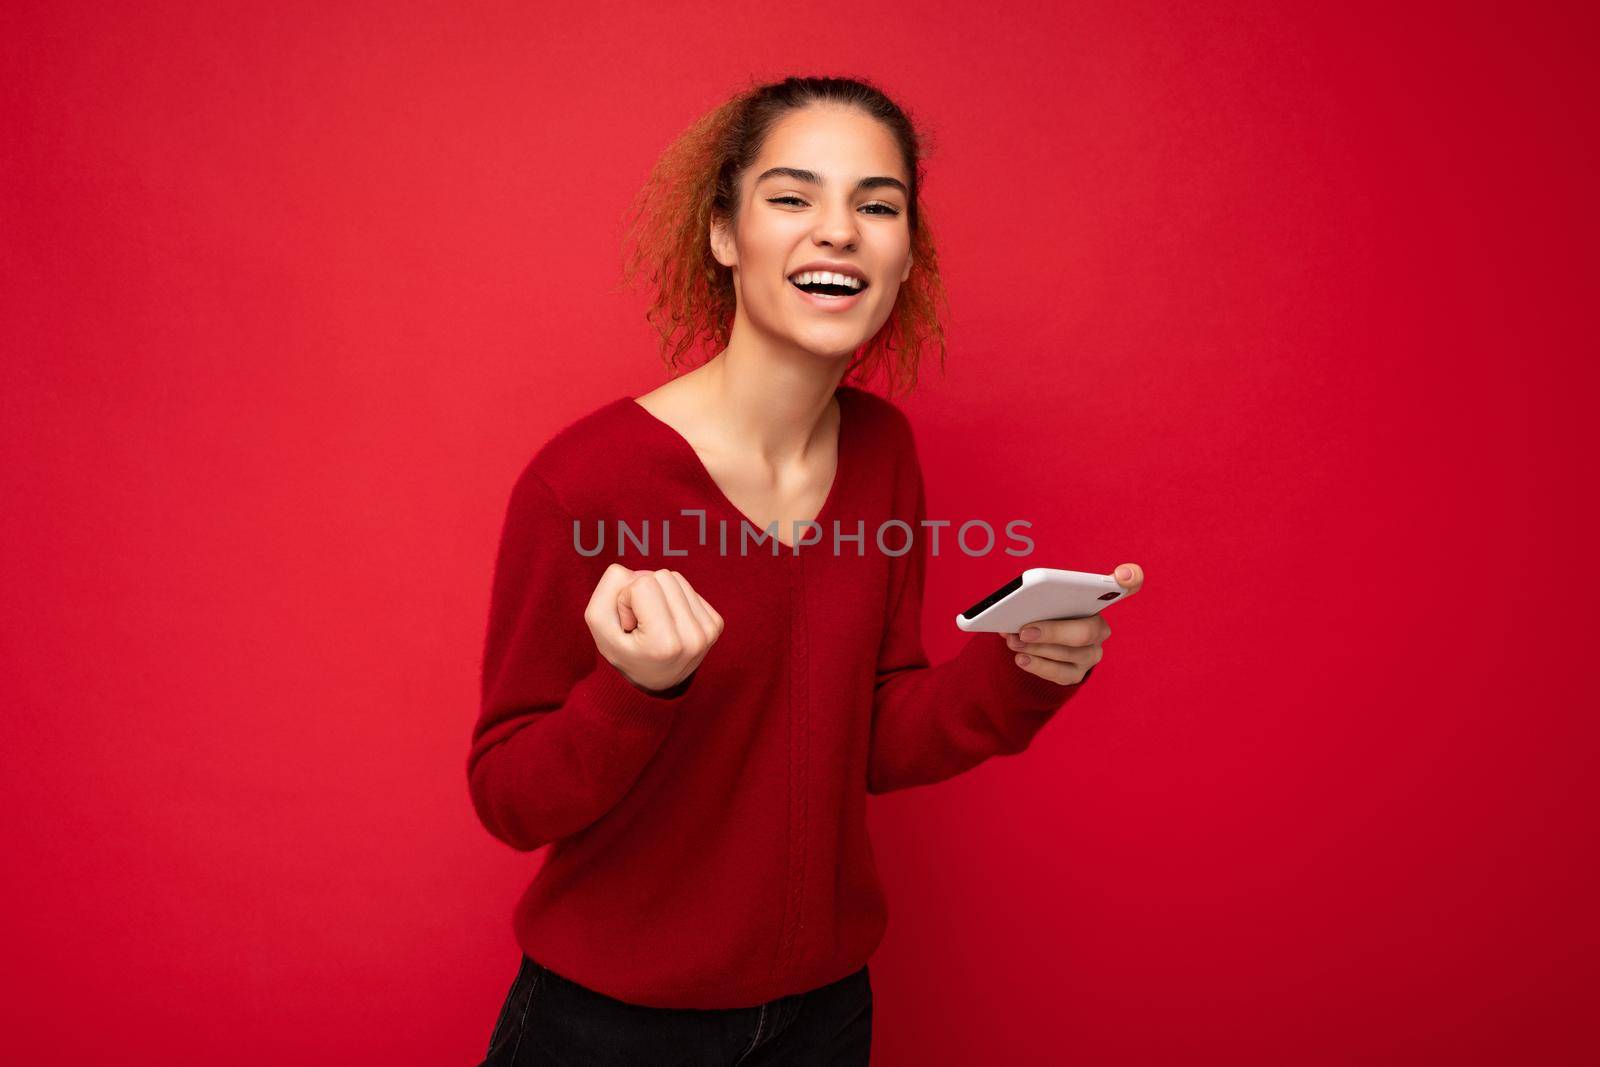 Young emotional woman wearing dark red sweater isolated over red background holding smartphone having fun and showing yes gesture looking at camera.